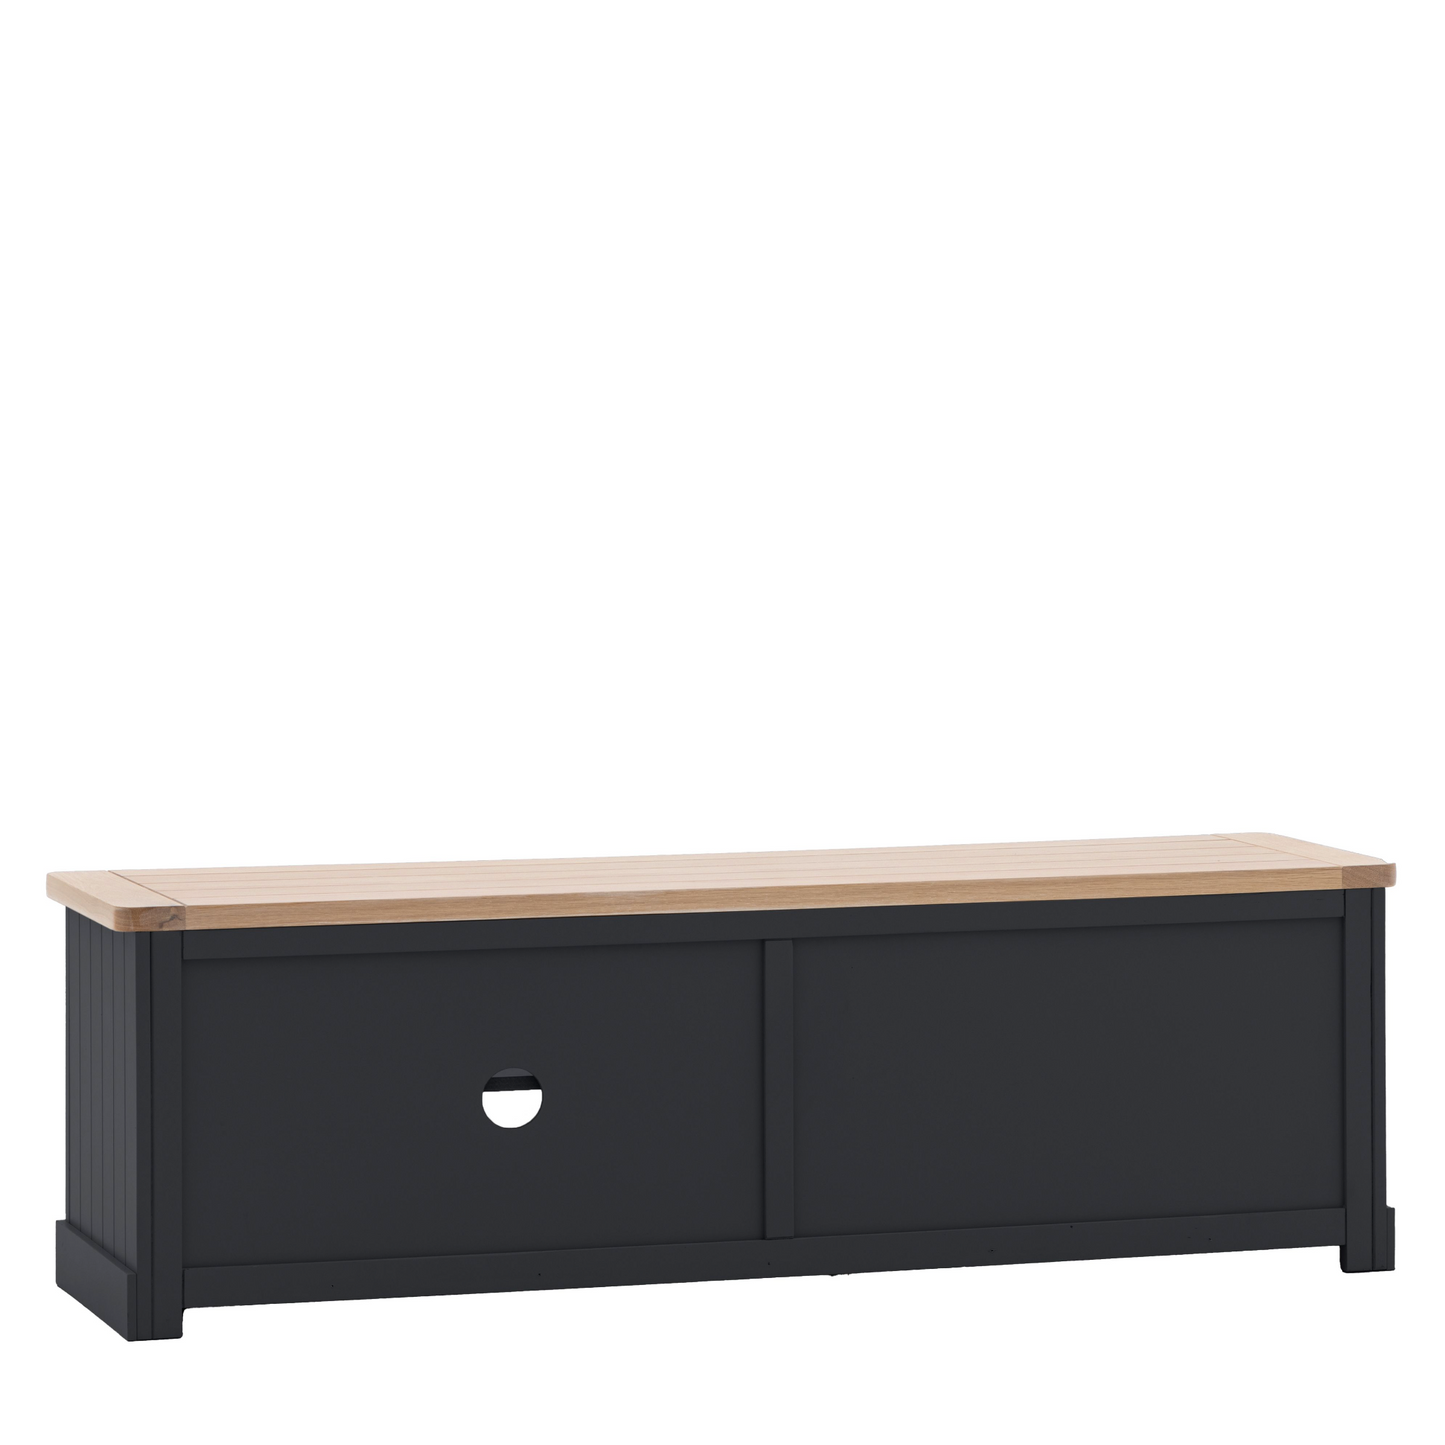 A Buckland Media Unit 1400x375x450mm in Meteor with two drawers for interior decor.